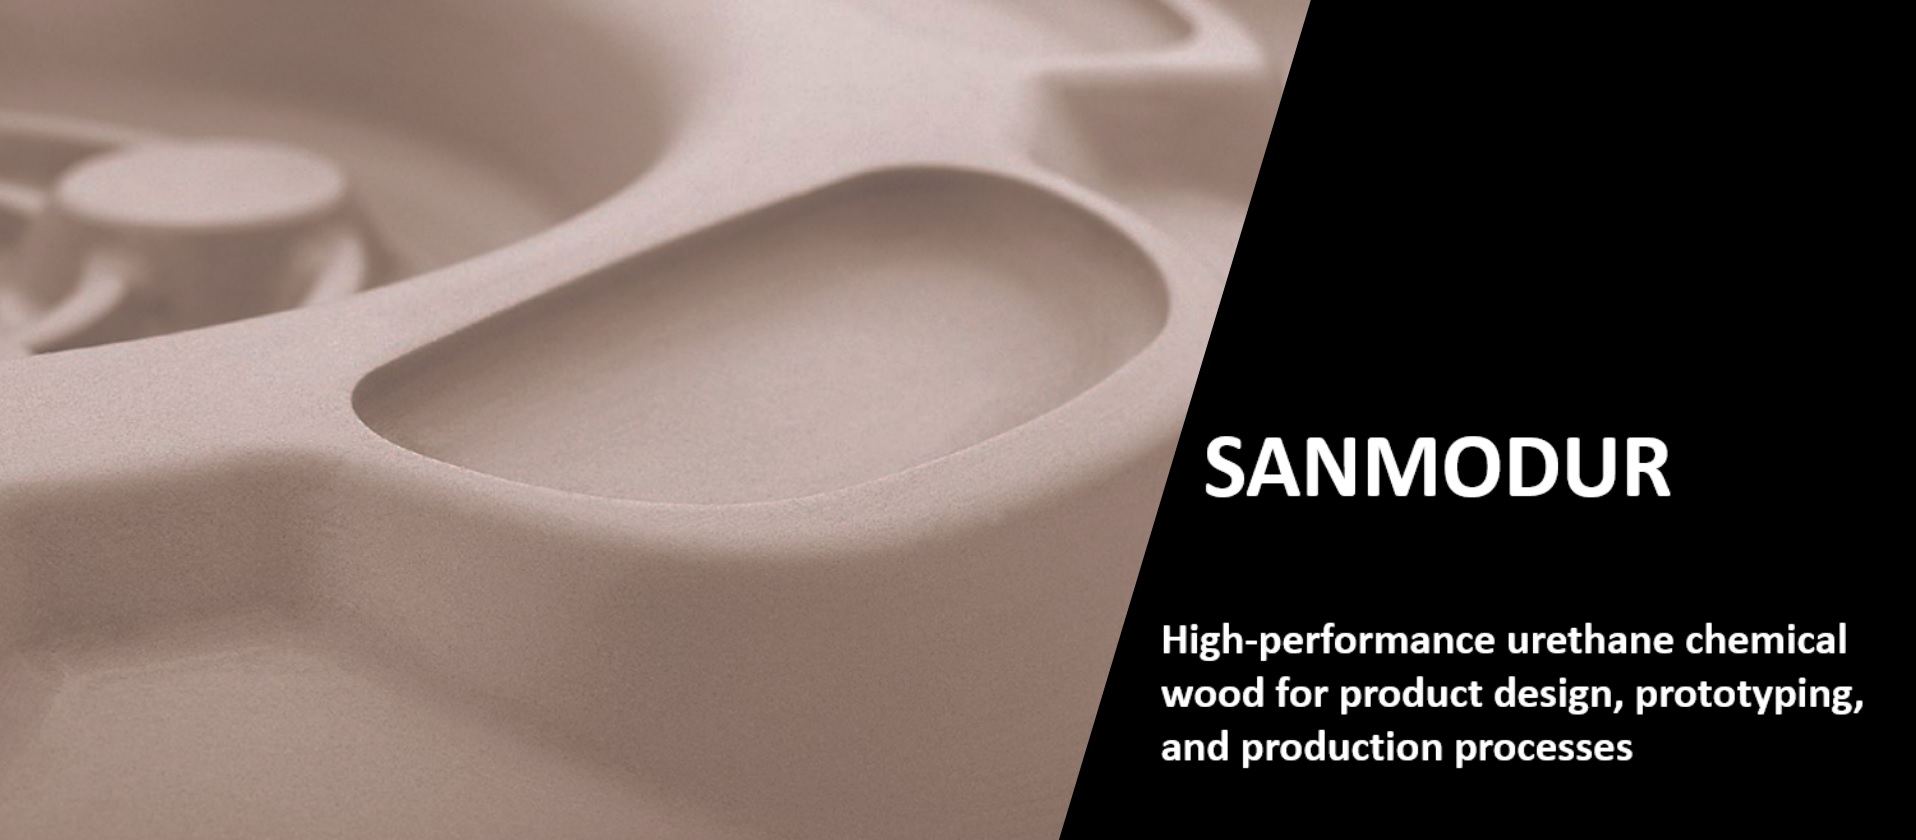 High-performance Urethane Tooling Board "SANMODUR" page is now open.